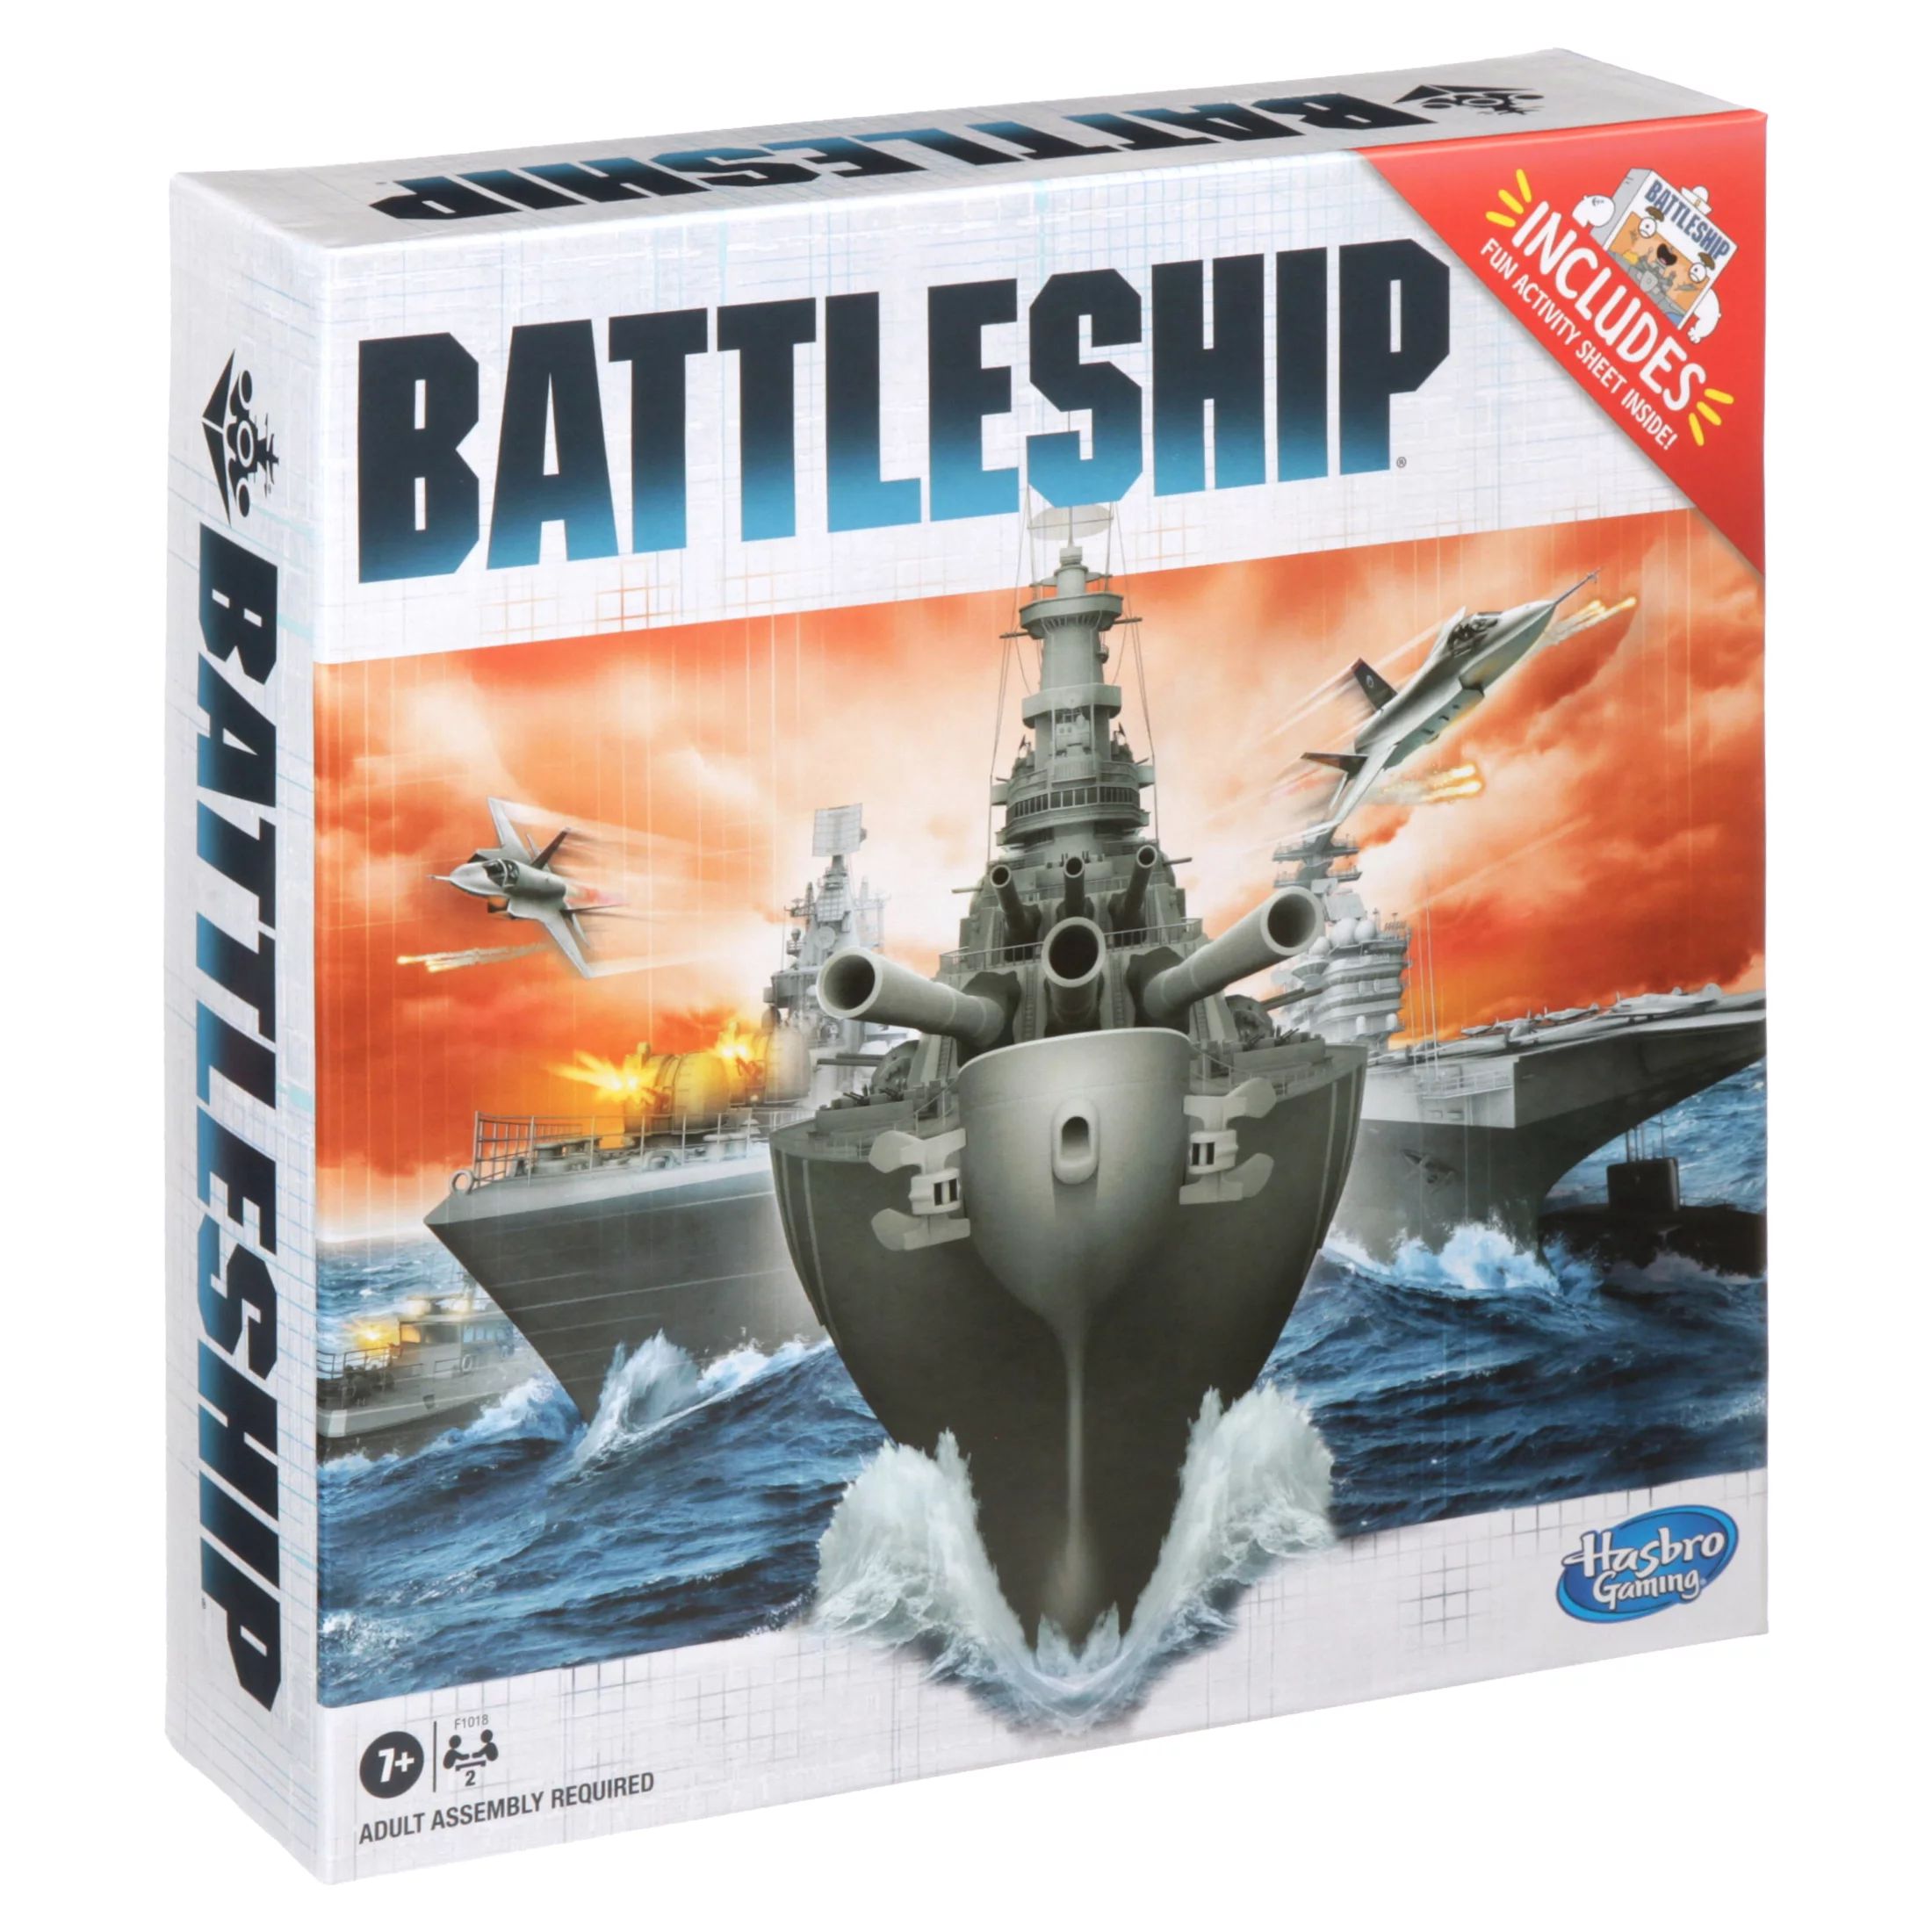 Battleship Board Game, Includes Activity Sheet, for 2 Players, for Kids Ages 7 and Up | Walmart (US)